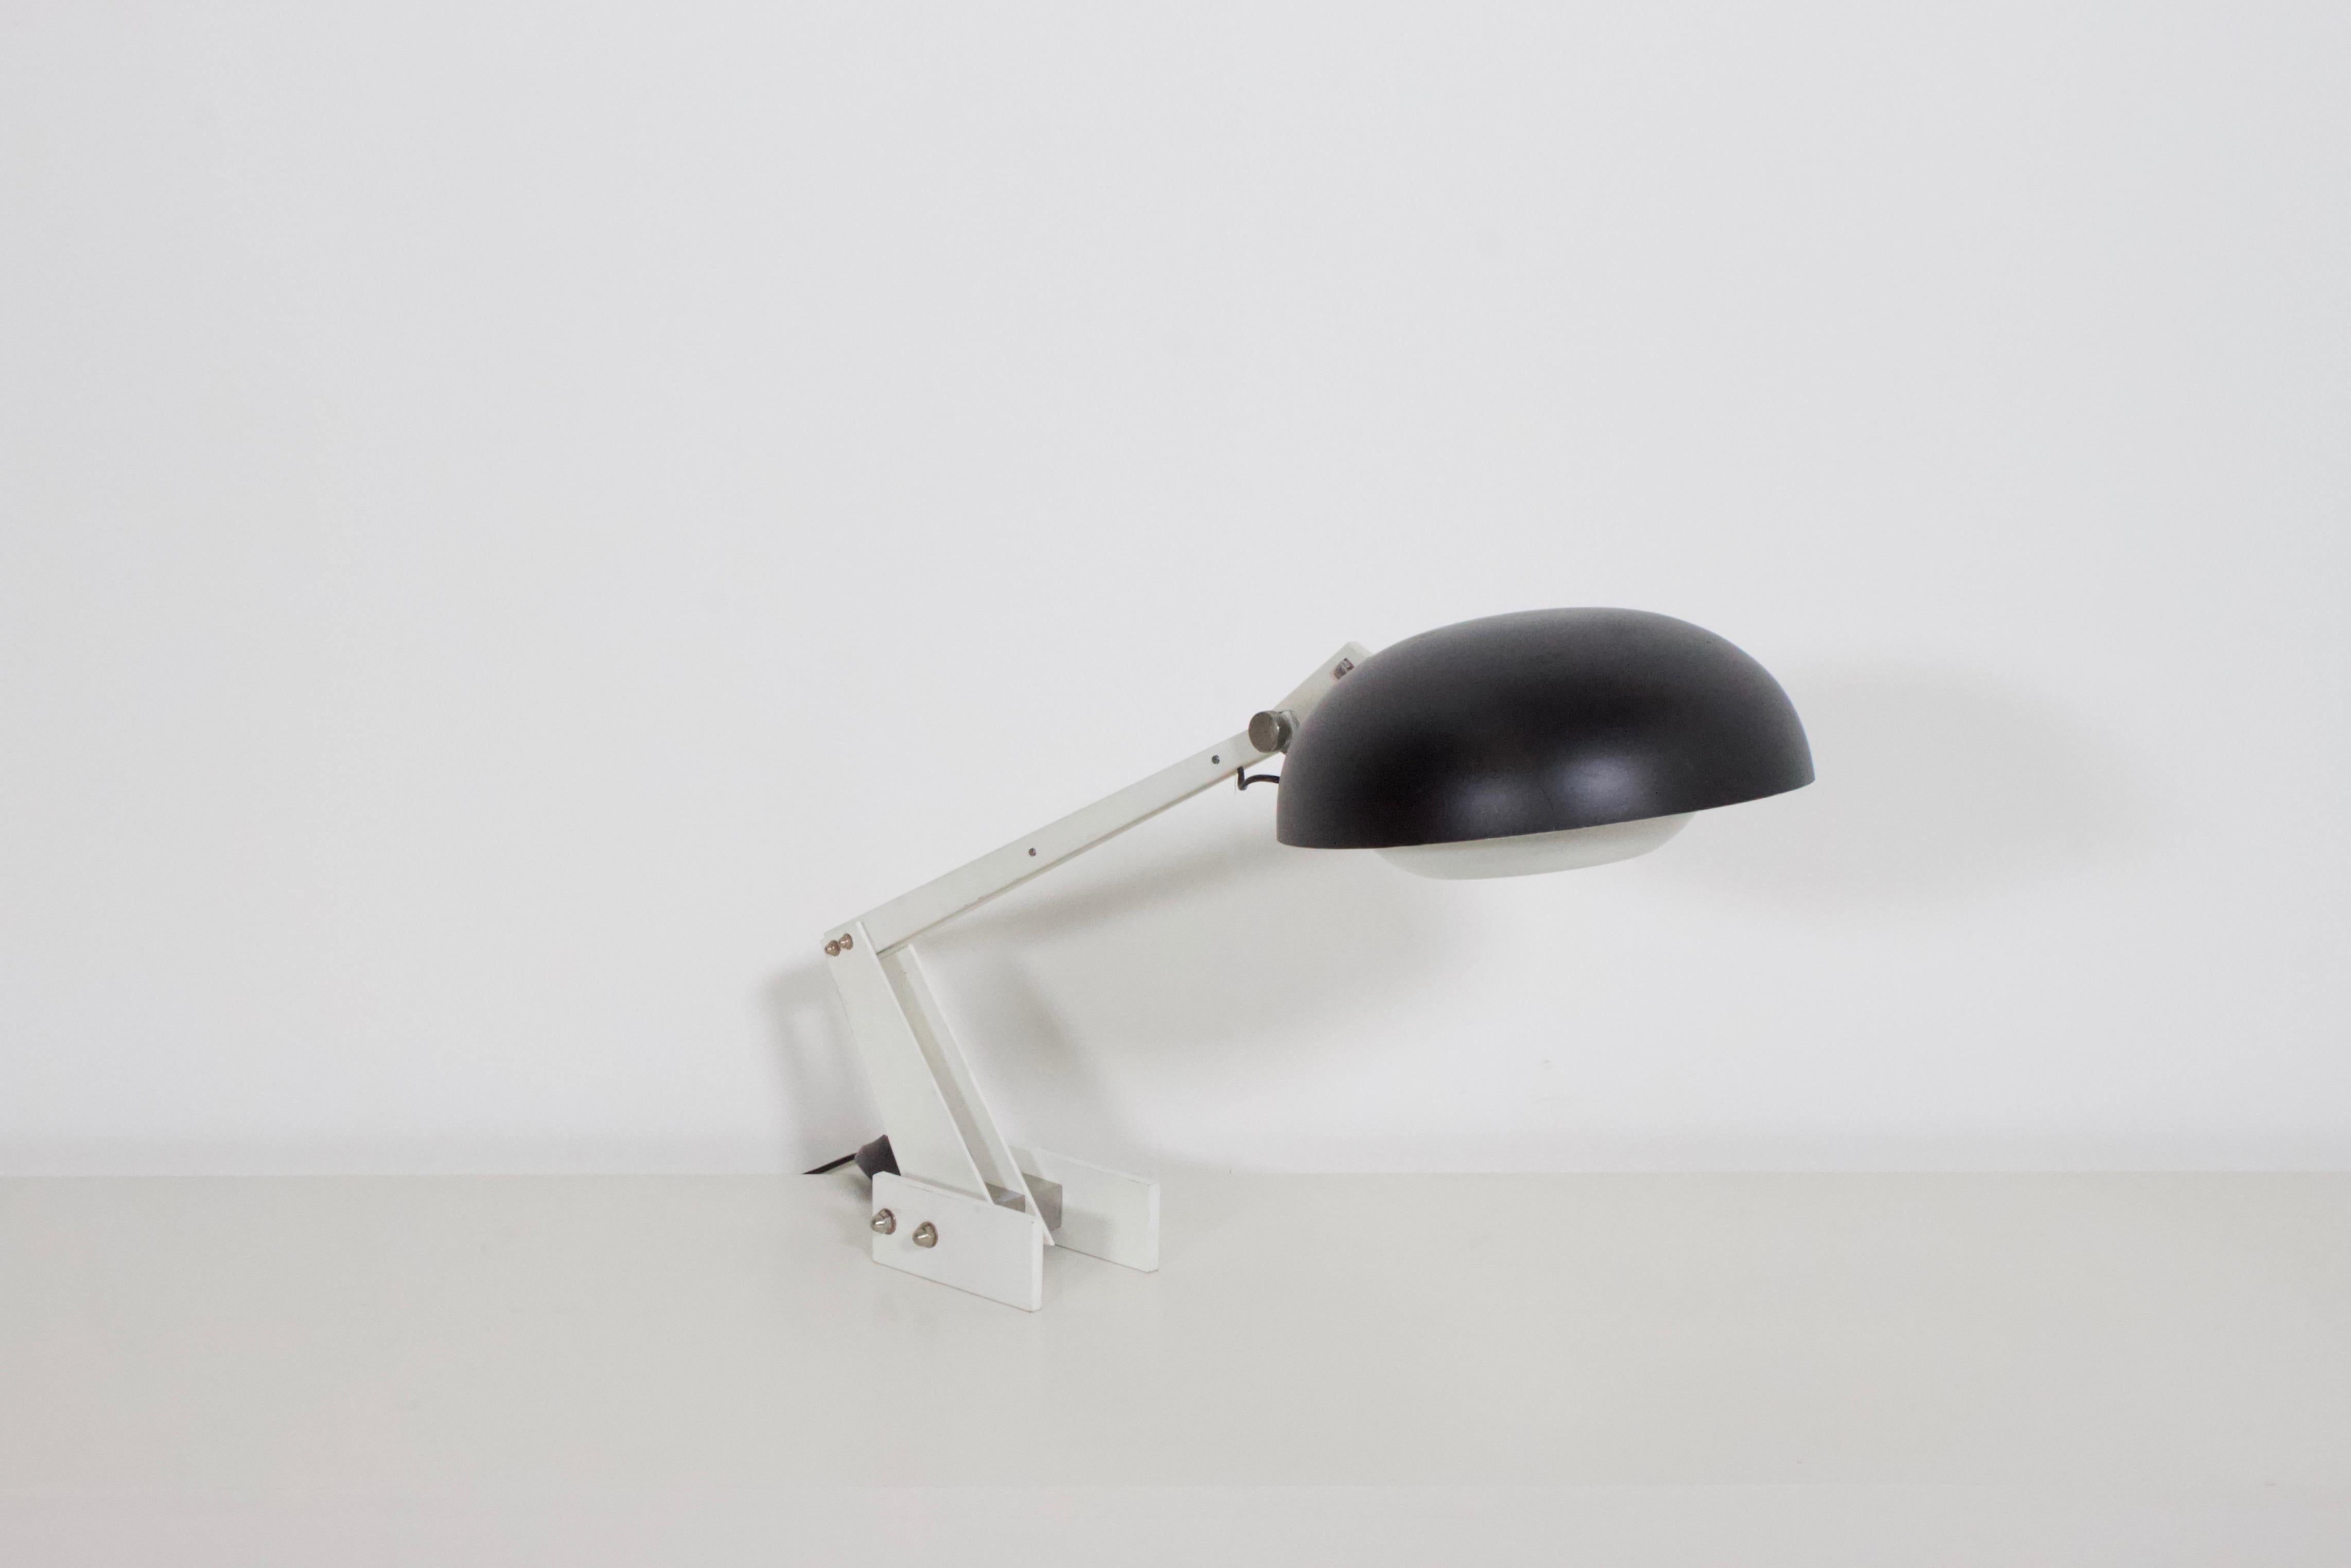 Very rare industrial table / desk lamp by Wim Rietveld in good condition.

Manufactured by Gispen in the Netherlands.

Black aluminum shade with a white aluminum diffuser which is adjustable.

Heavy enameled steel frame bolted together with